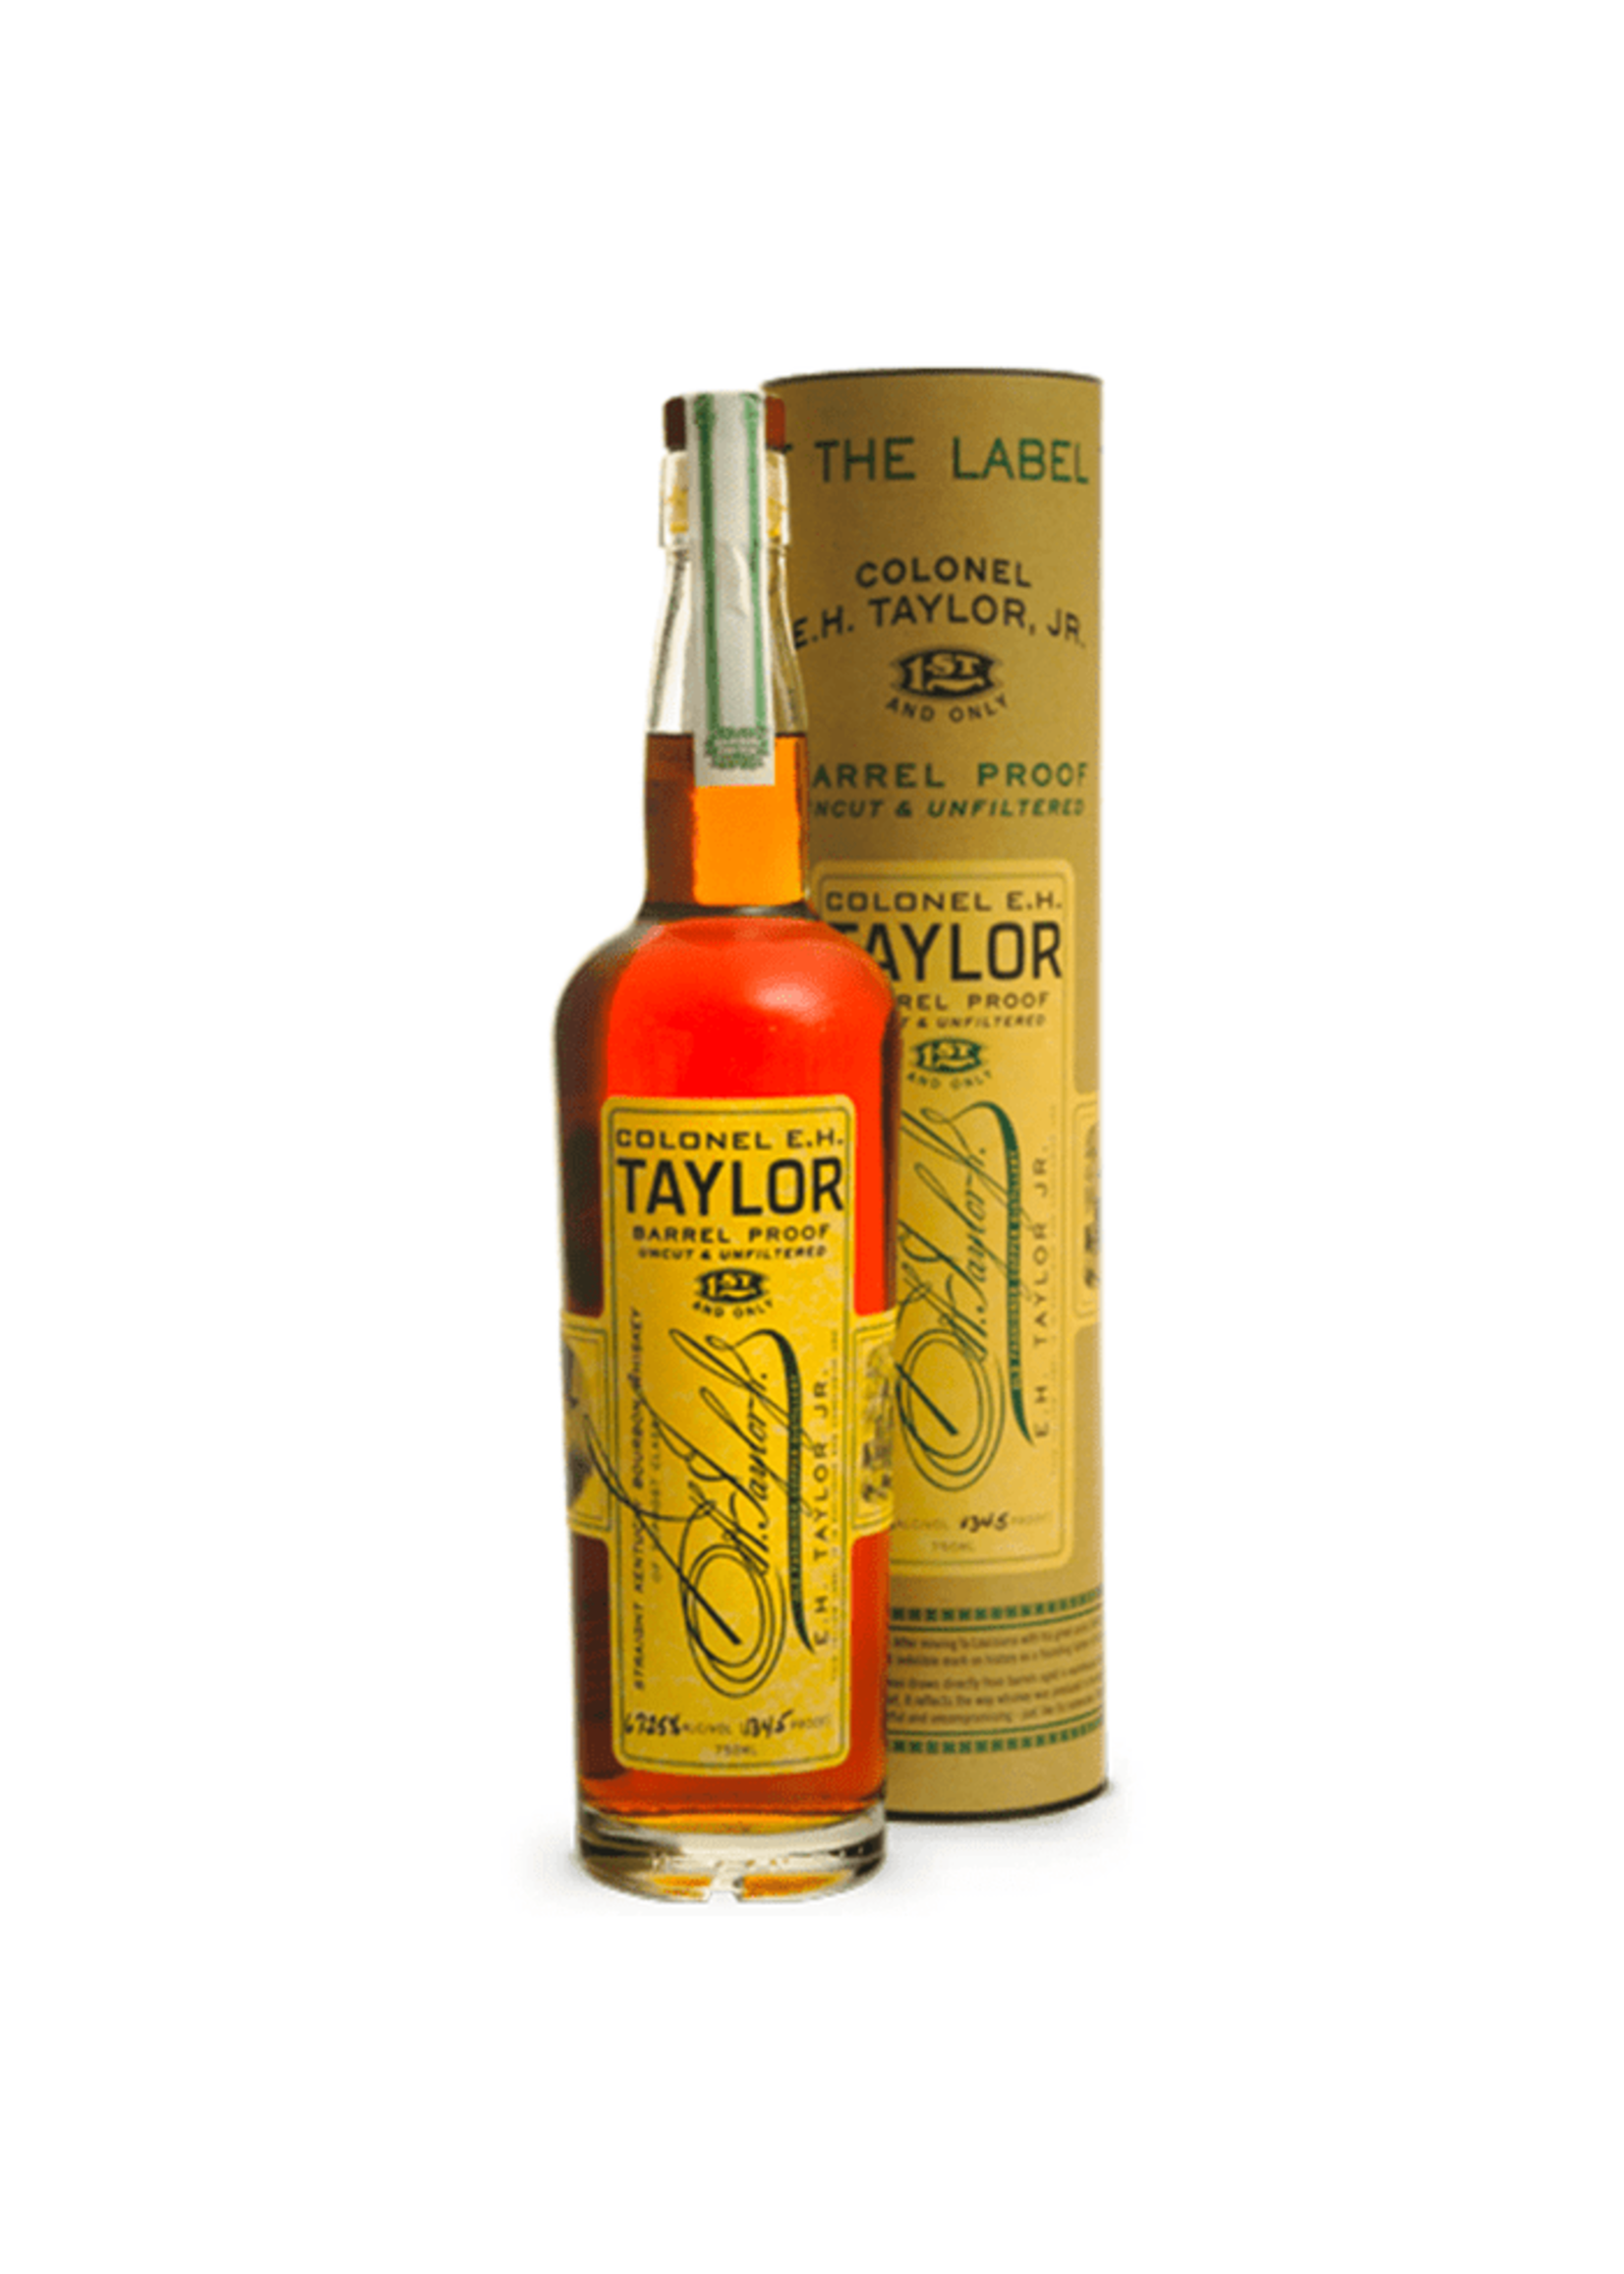 Colonel E.H. Taylor Barrel Proof Uncut & Unfiltered Kentucky Straight Bourbon Whiskey 127.30ProoF 750ml